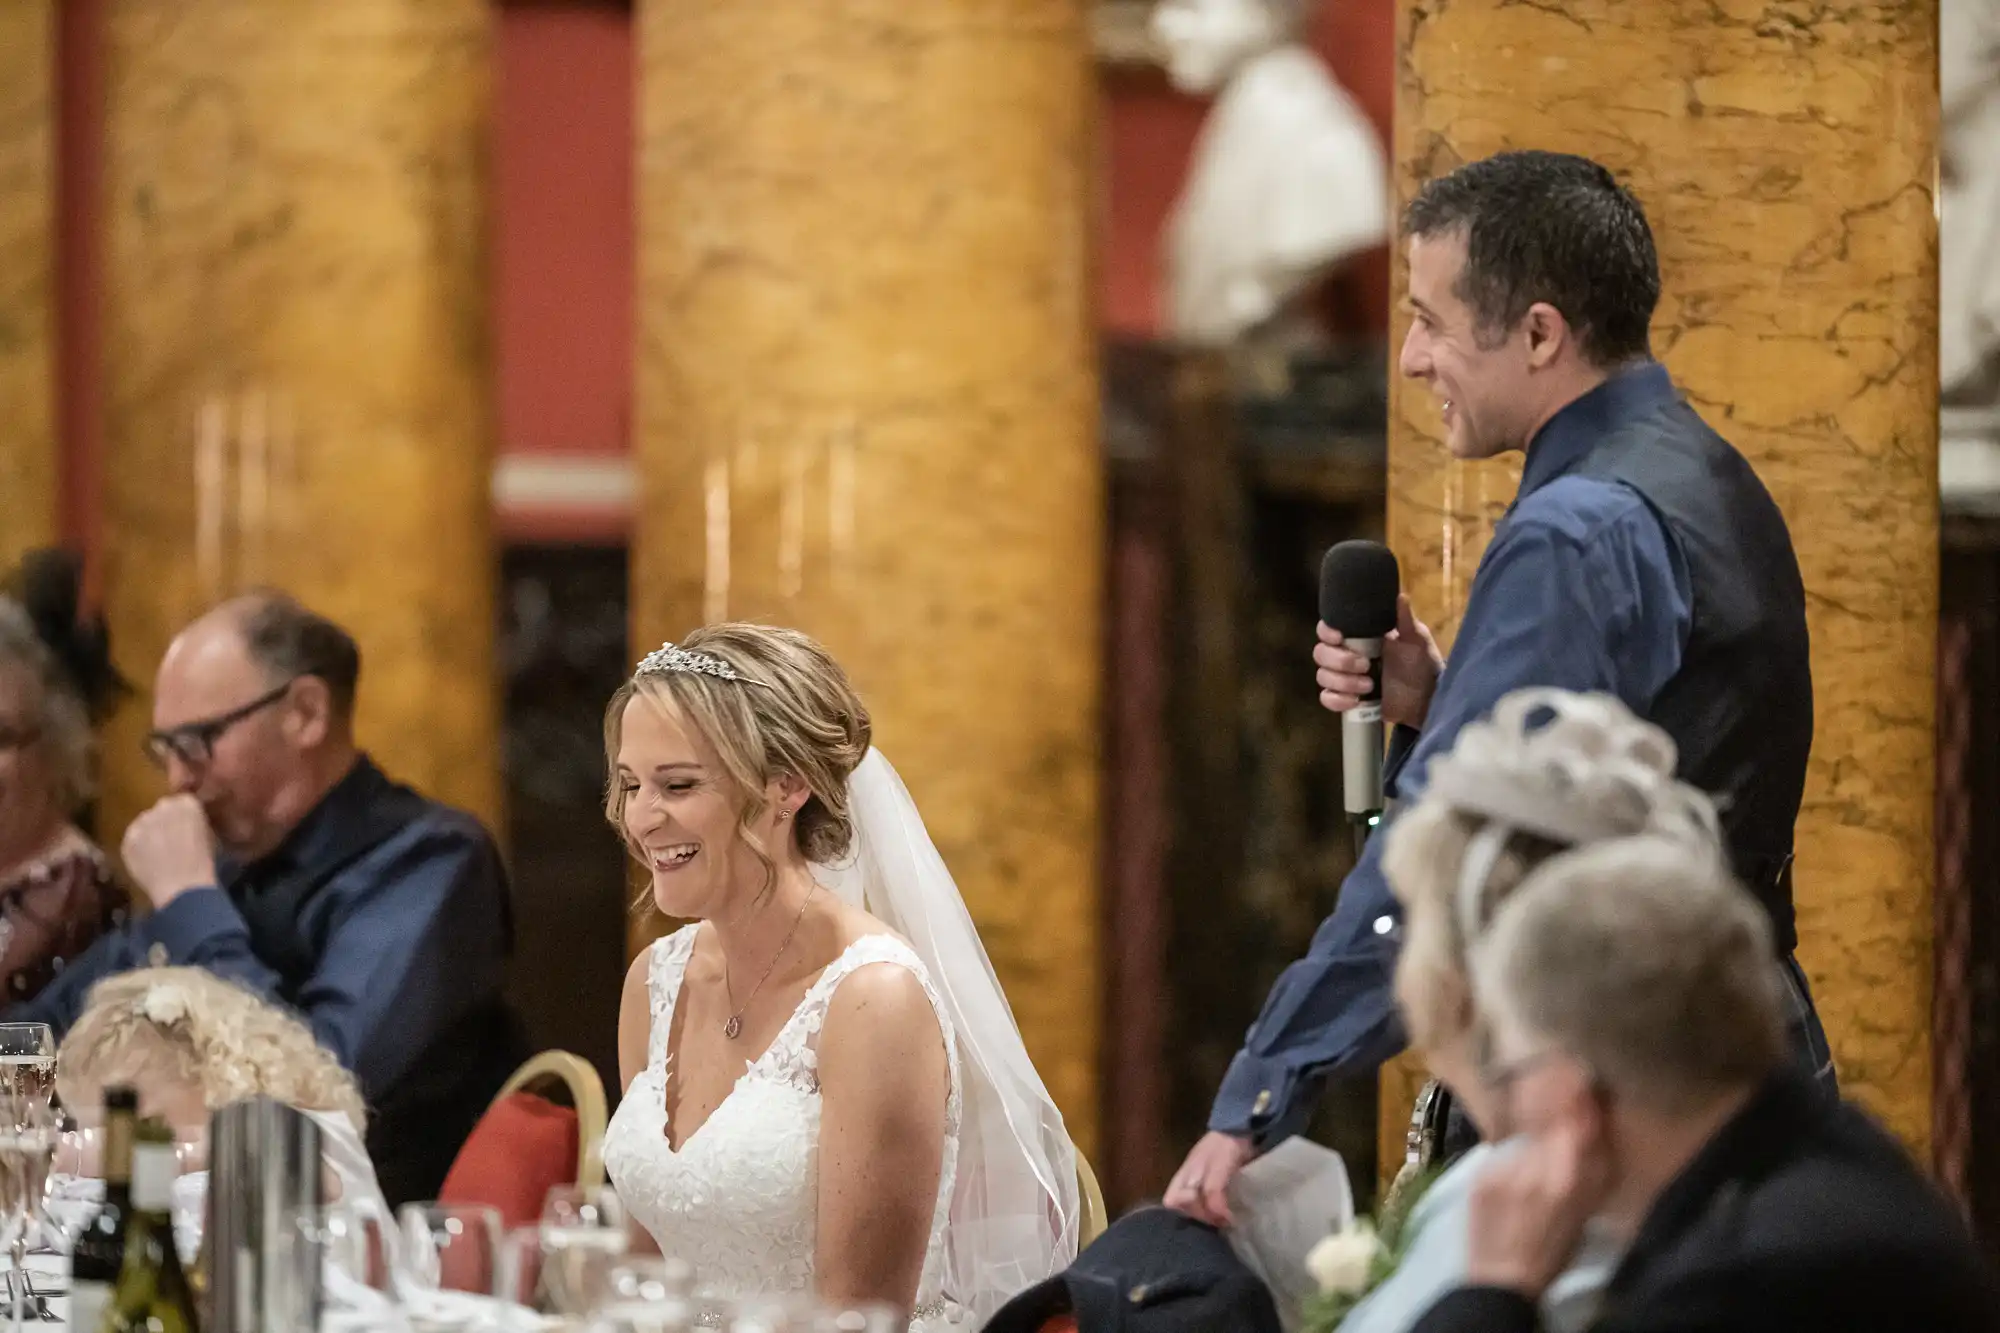 A man speaks into a microphone while a woman in a white dress and veil smiles, surrounded by seated guests in a room with large, yellow marble columns.